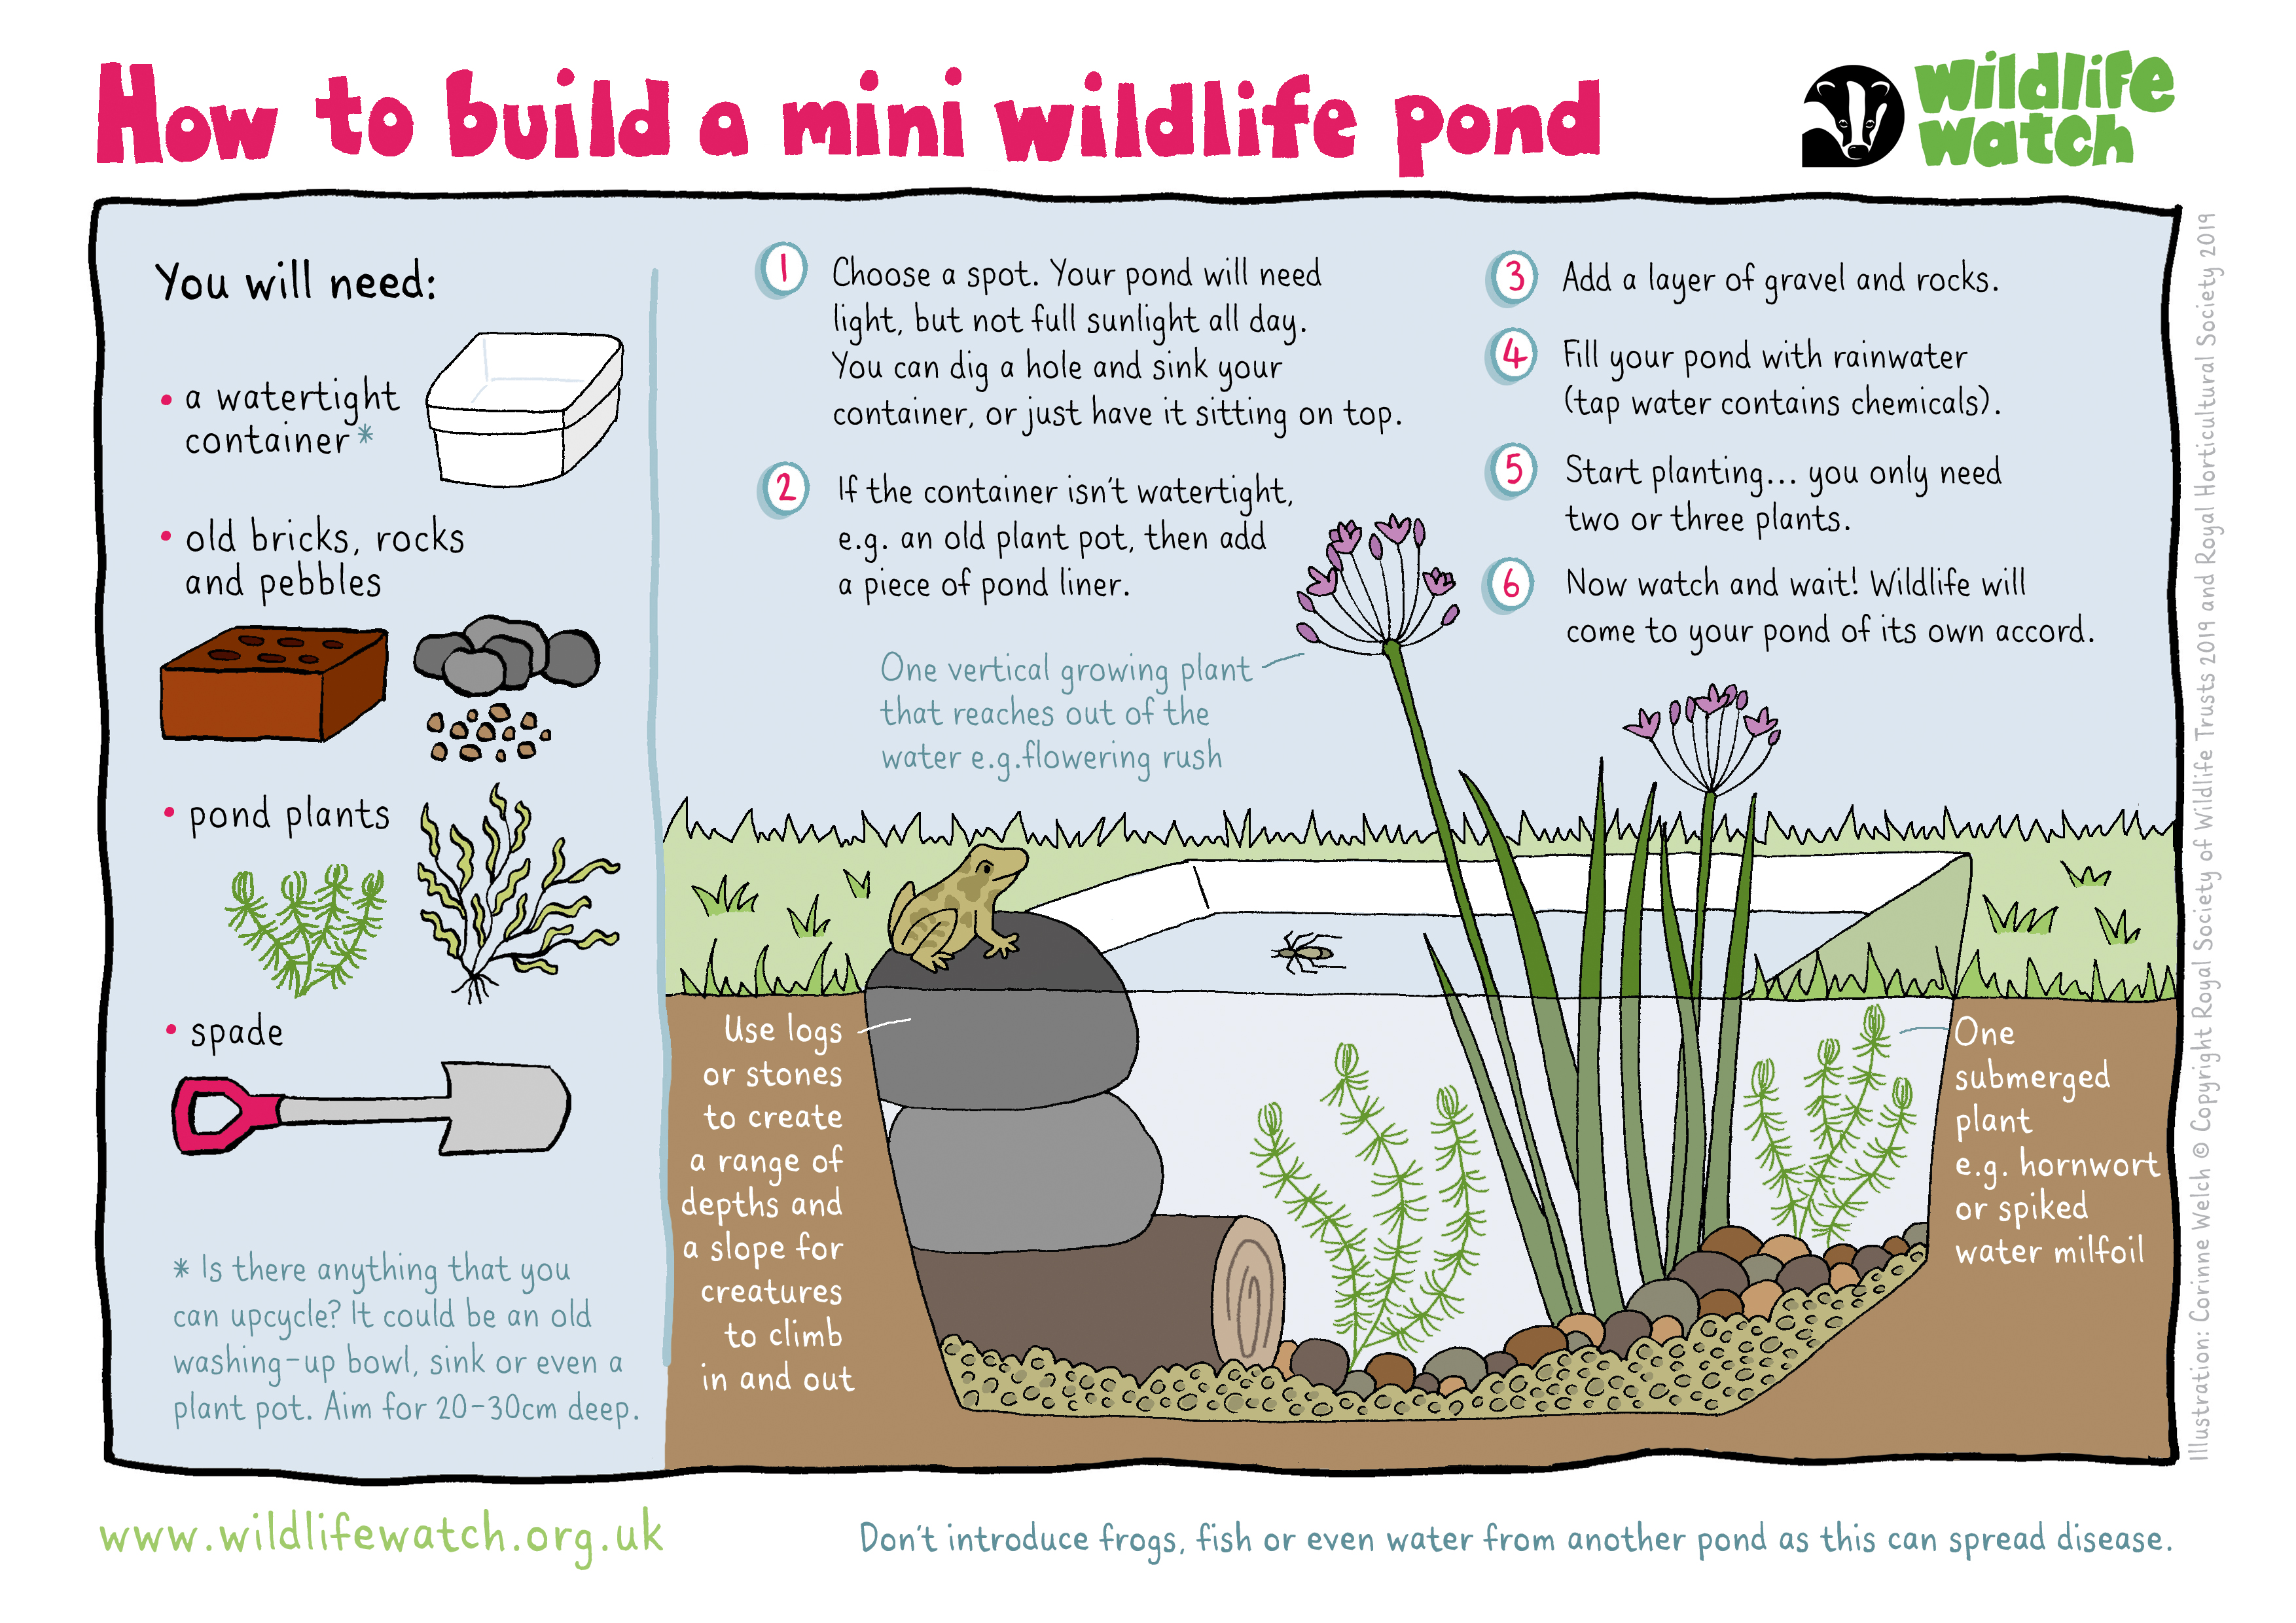 How to create a mini pond | The Wildlife Trusts